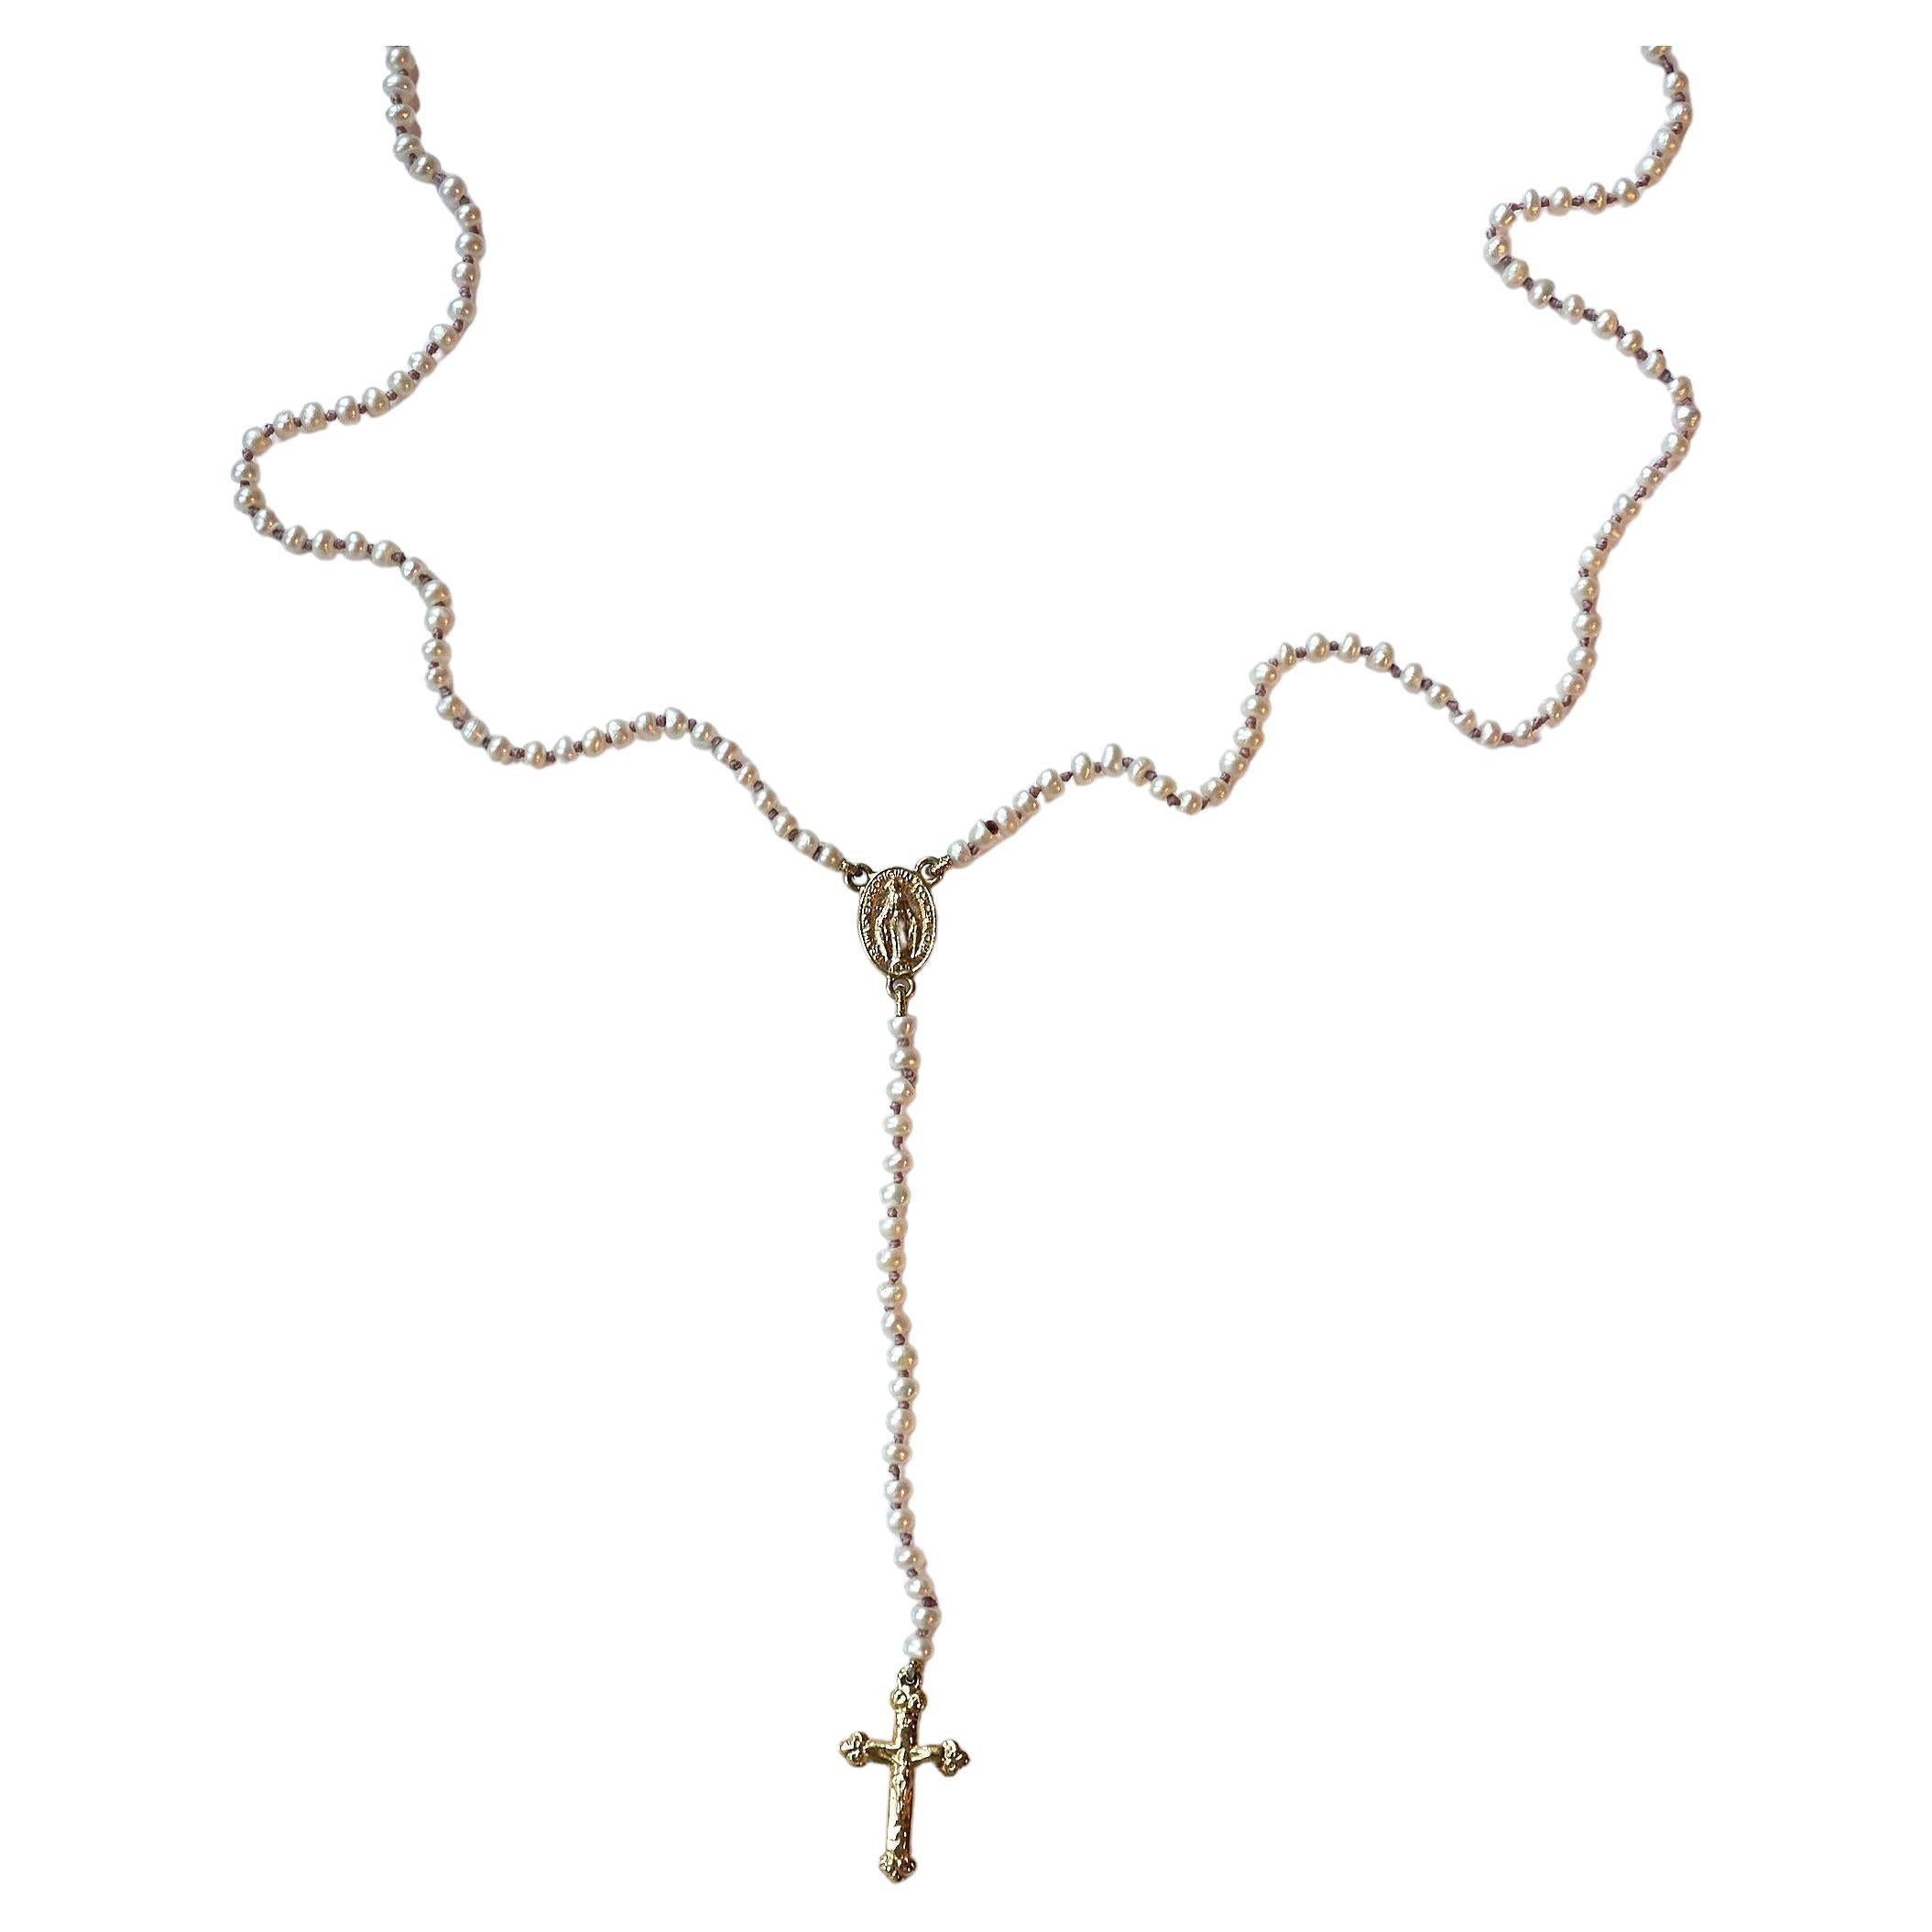 Rosario White Pearl Crucifix Cross Virgin Mary 14k Gold Religious Necklace

Symbols or medals can become a powerful tool in our arsenal for the spiritual. 
Since ancient times spiritual pendants, religious medals has been used to protect us. During